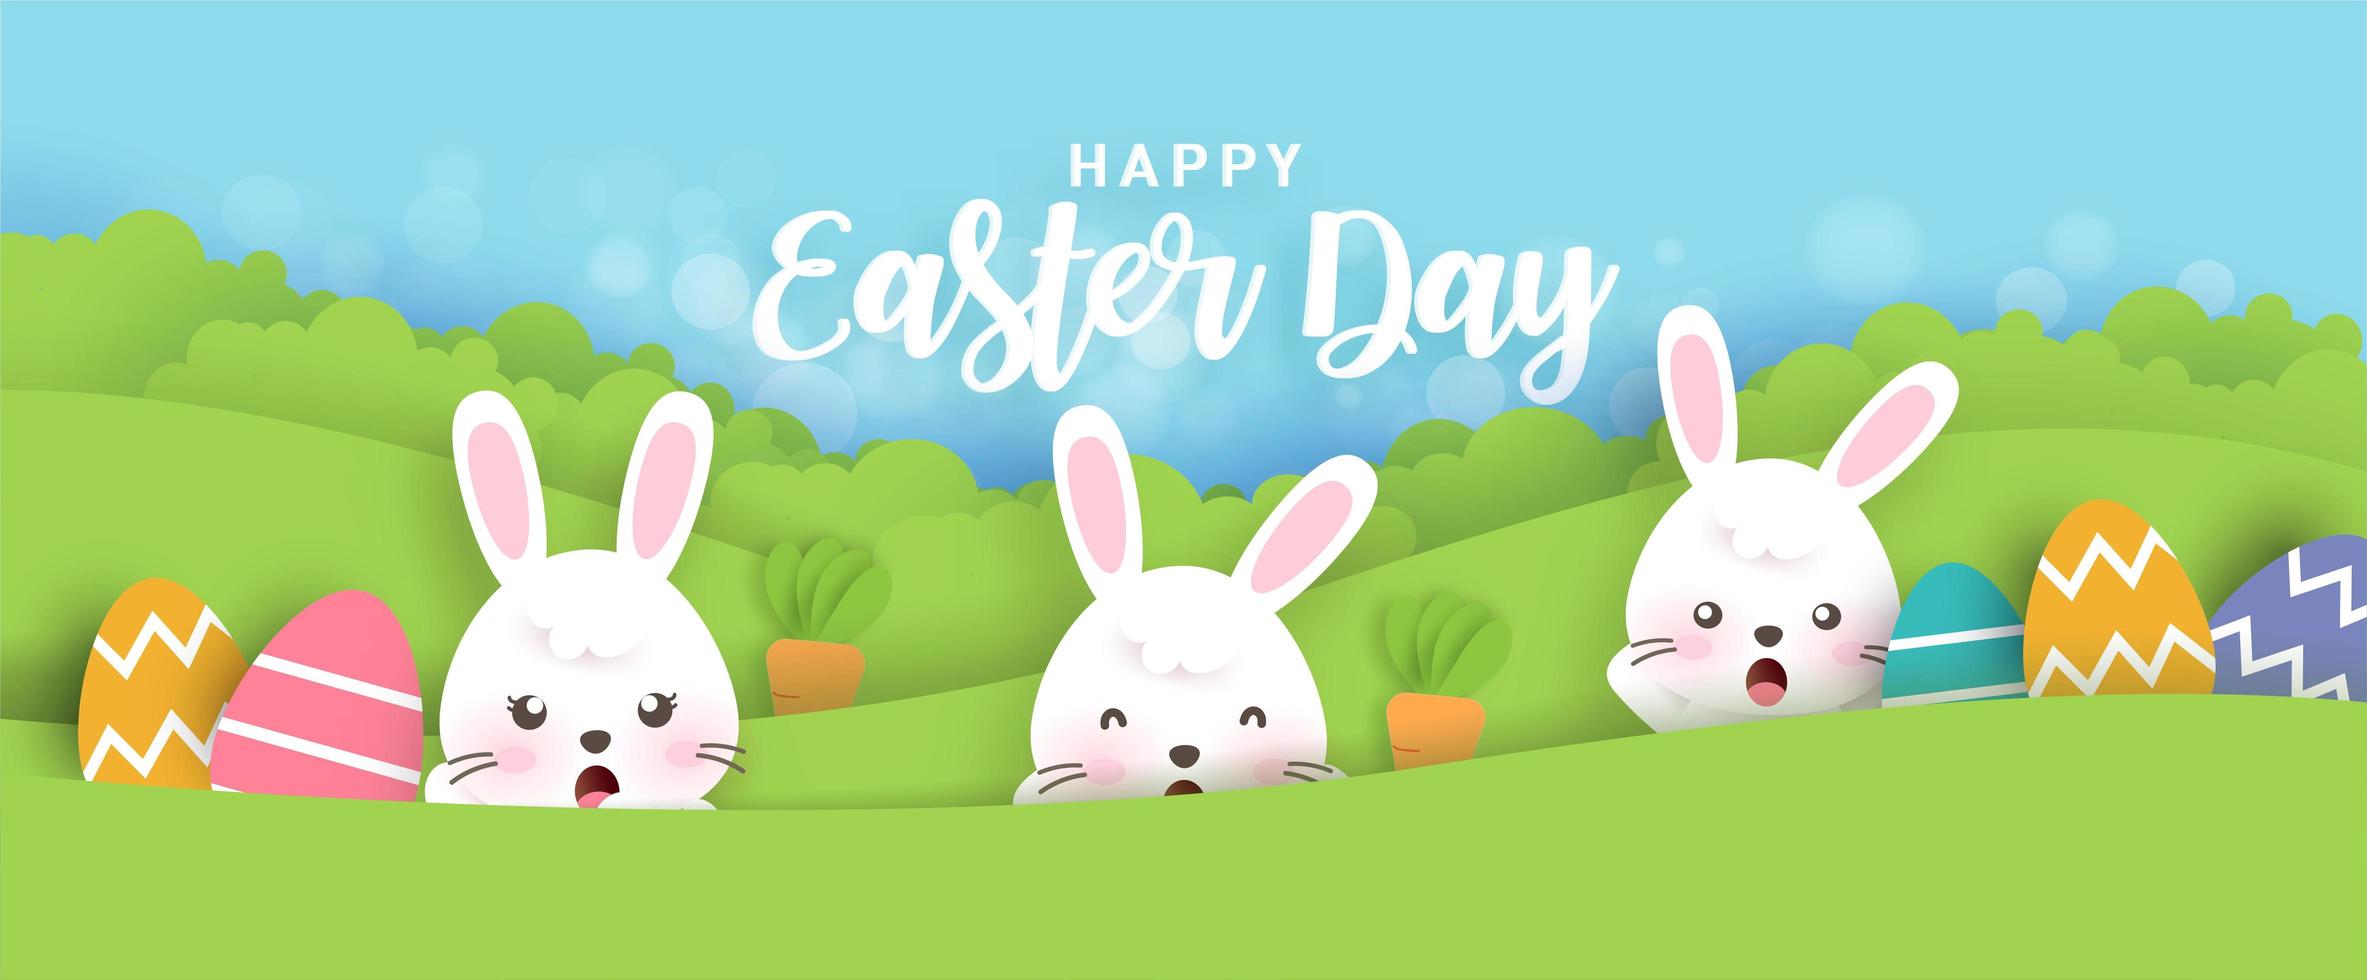 Paper Cut Easter Banner with Rabbits, Eggs vector